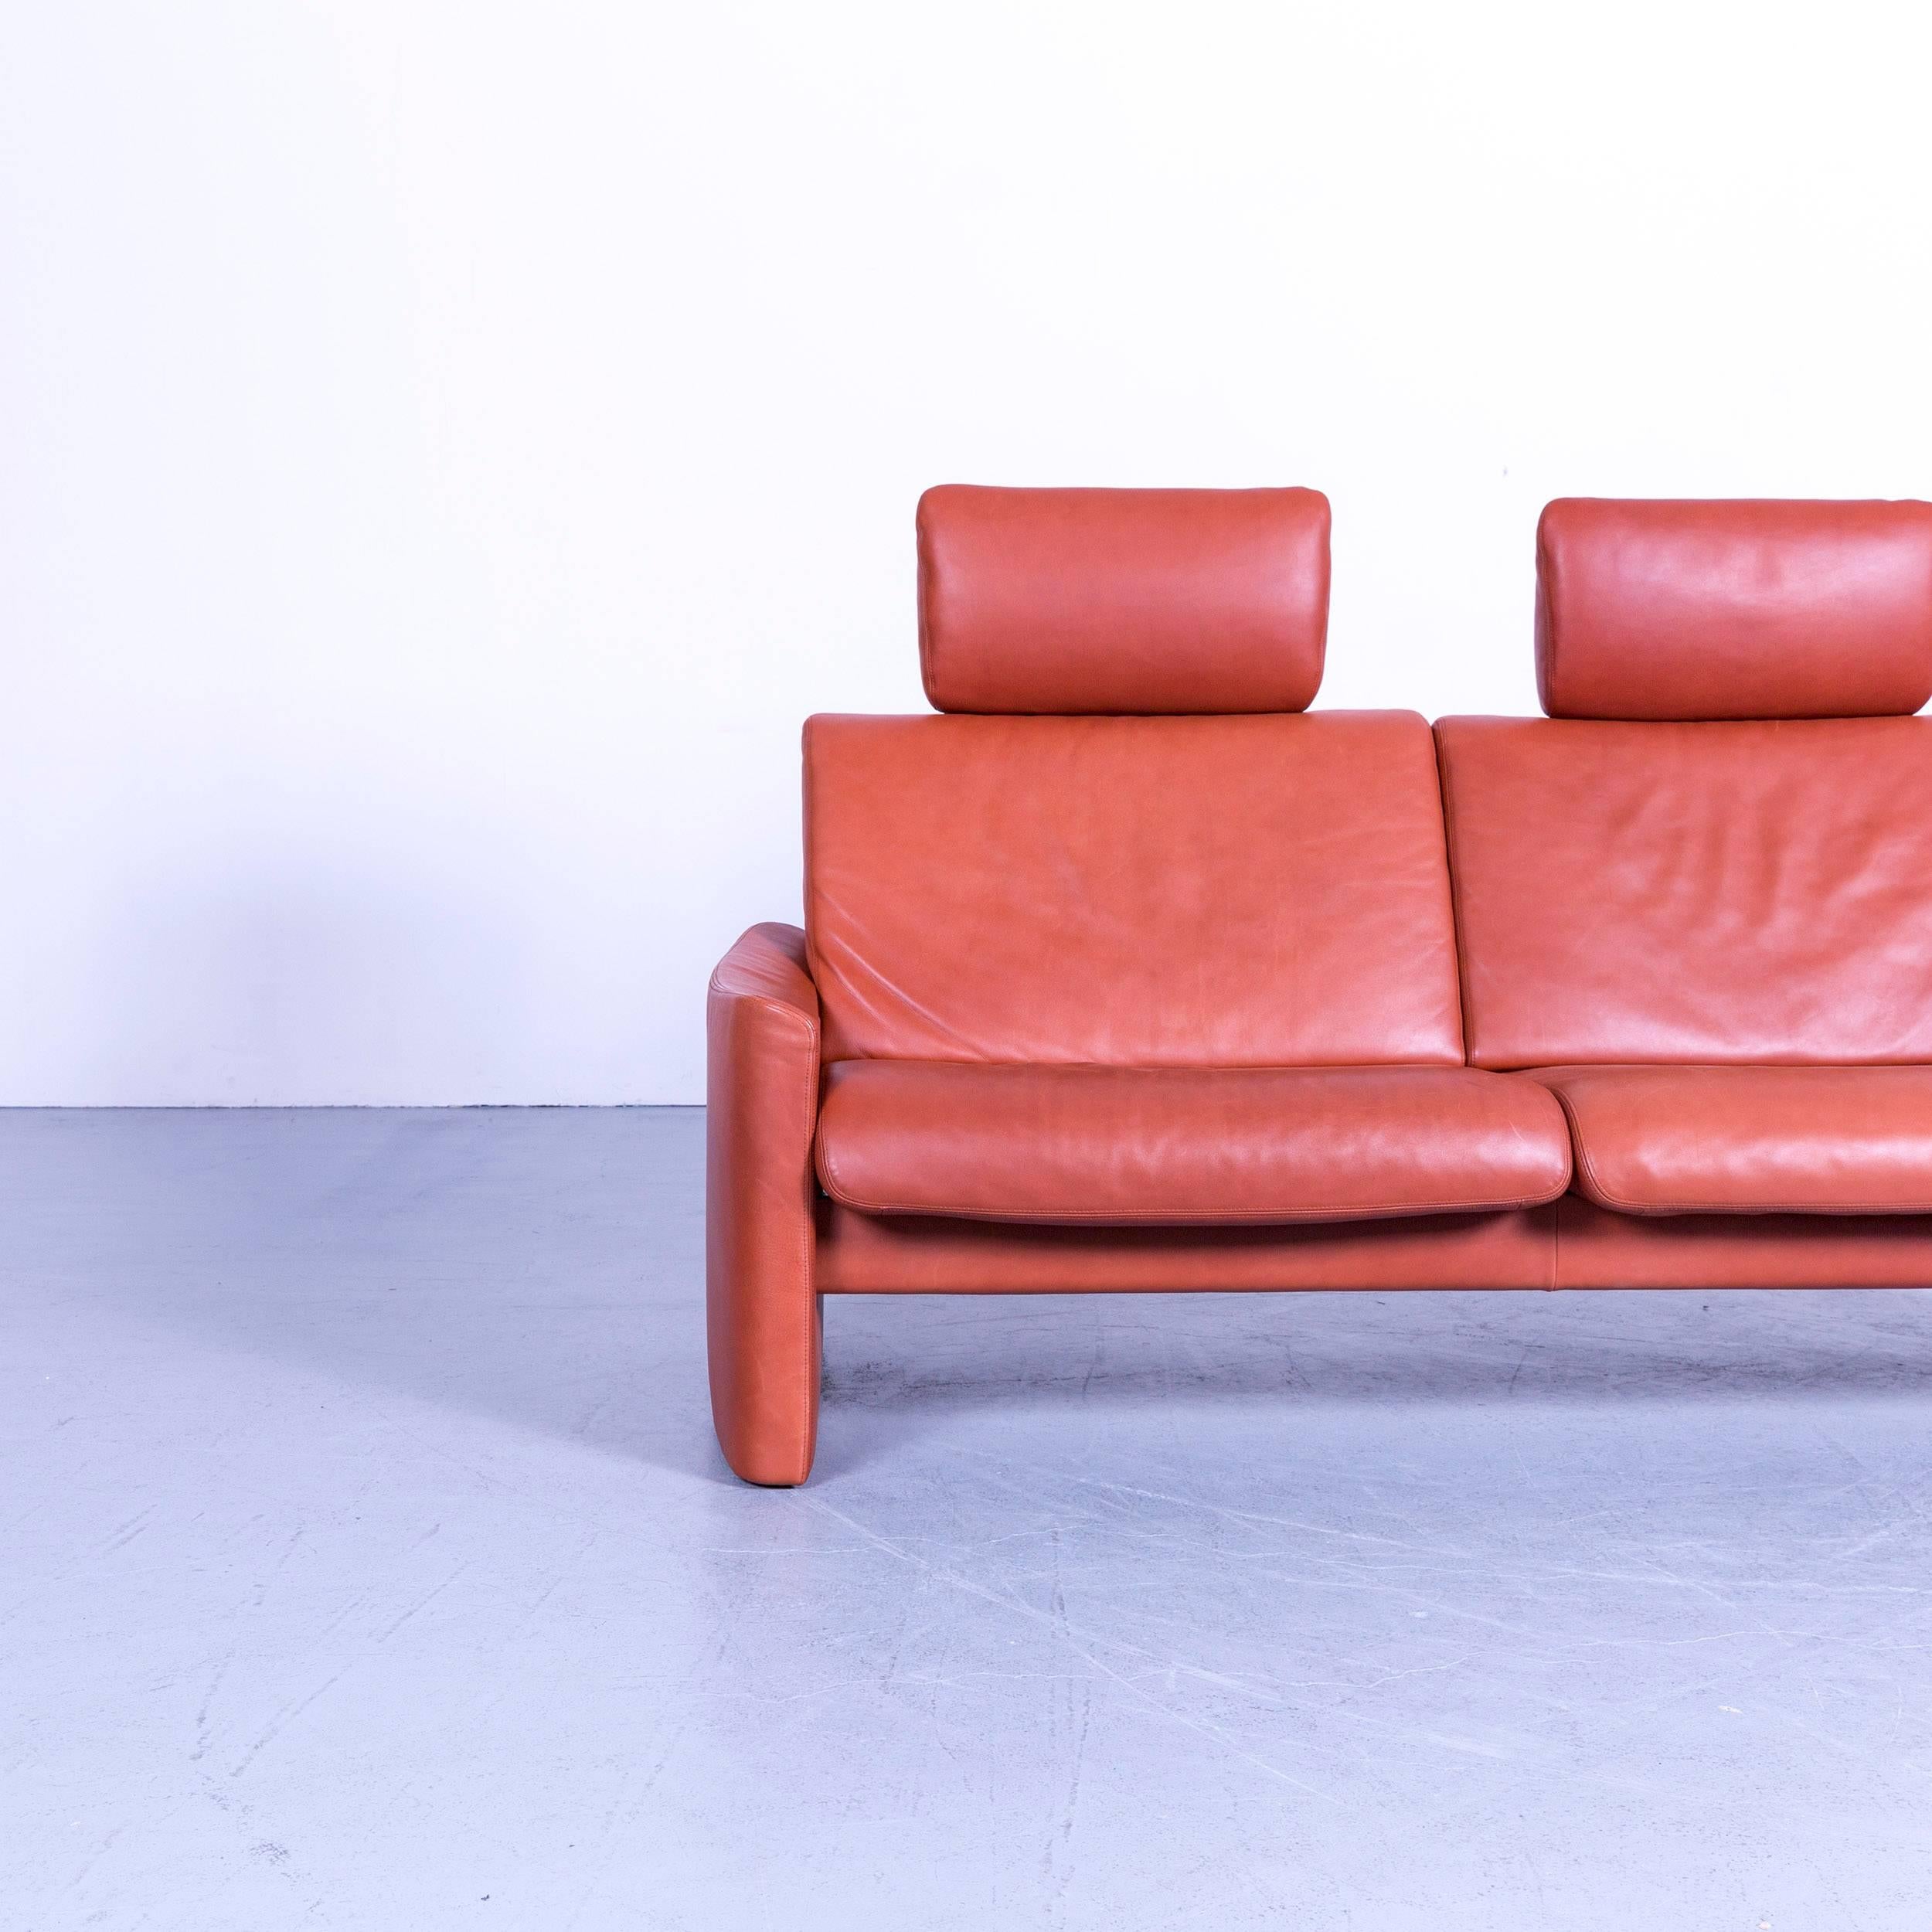 Erpo designer sofa leather brown, in a minimalistic and modern design, with convenient functions, made for pure comfort.